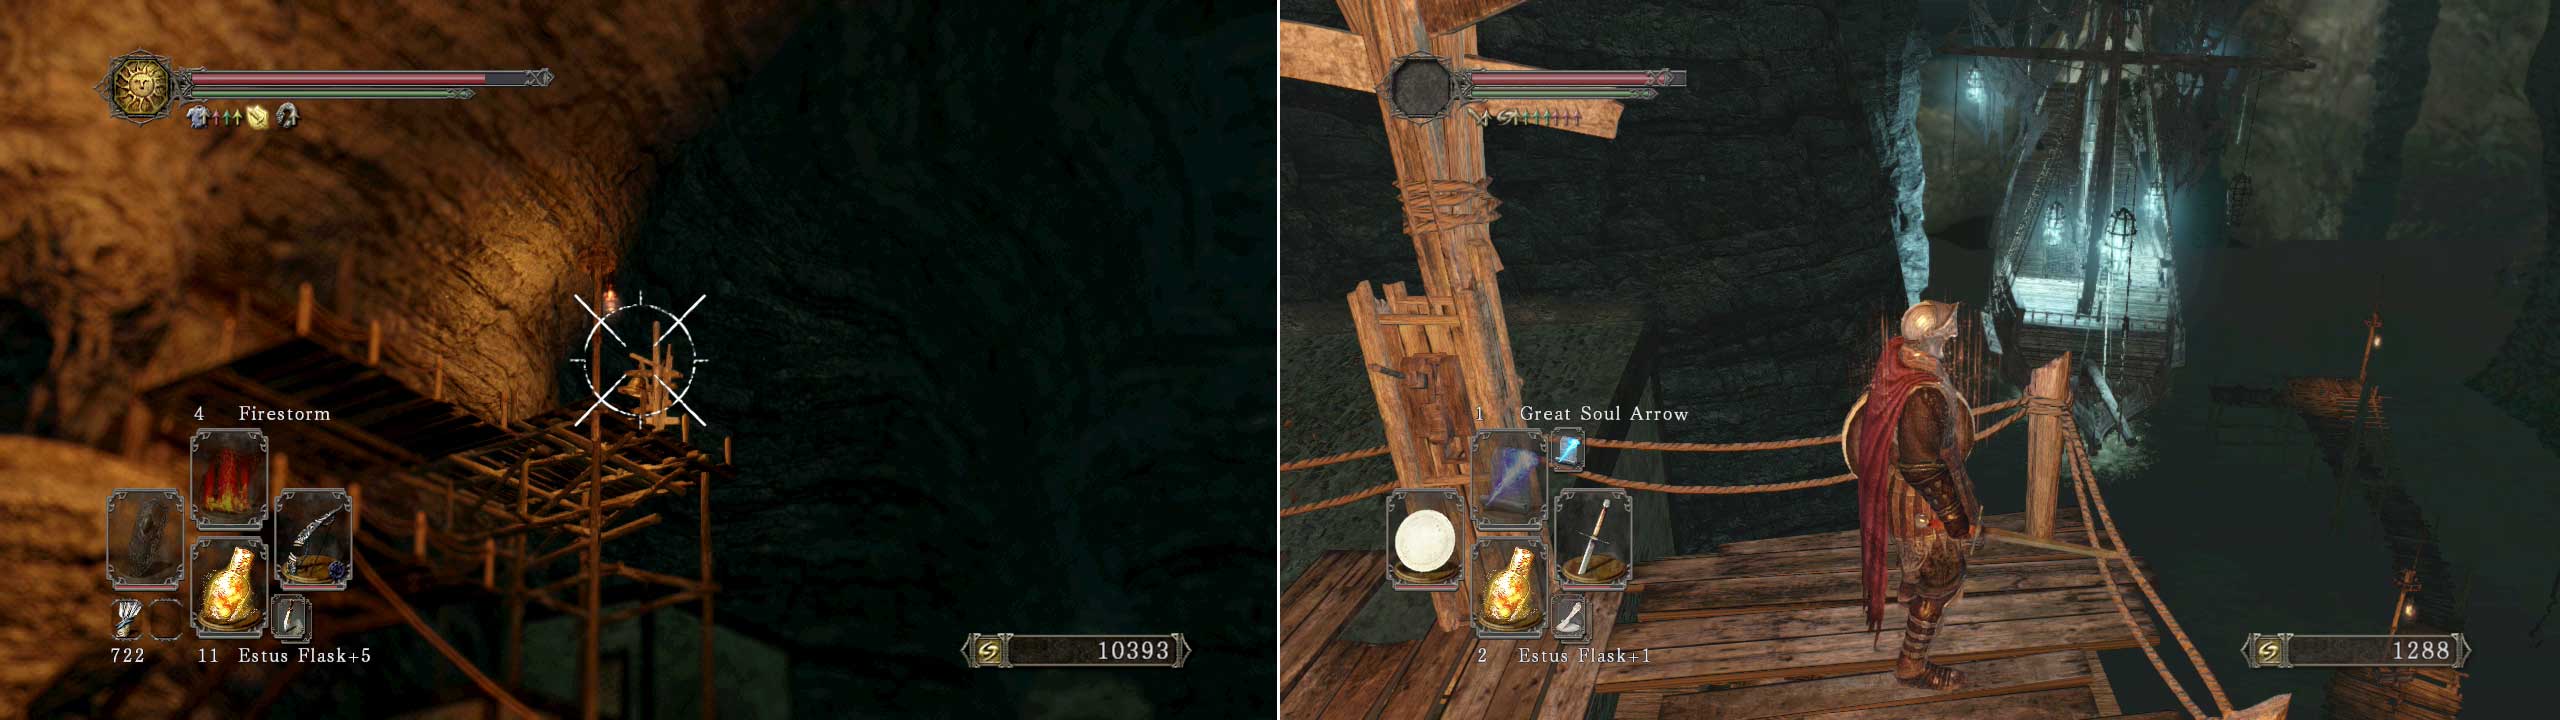 The sneaky and the normal ways to ring the bell to summon the boat in.